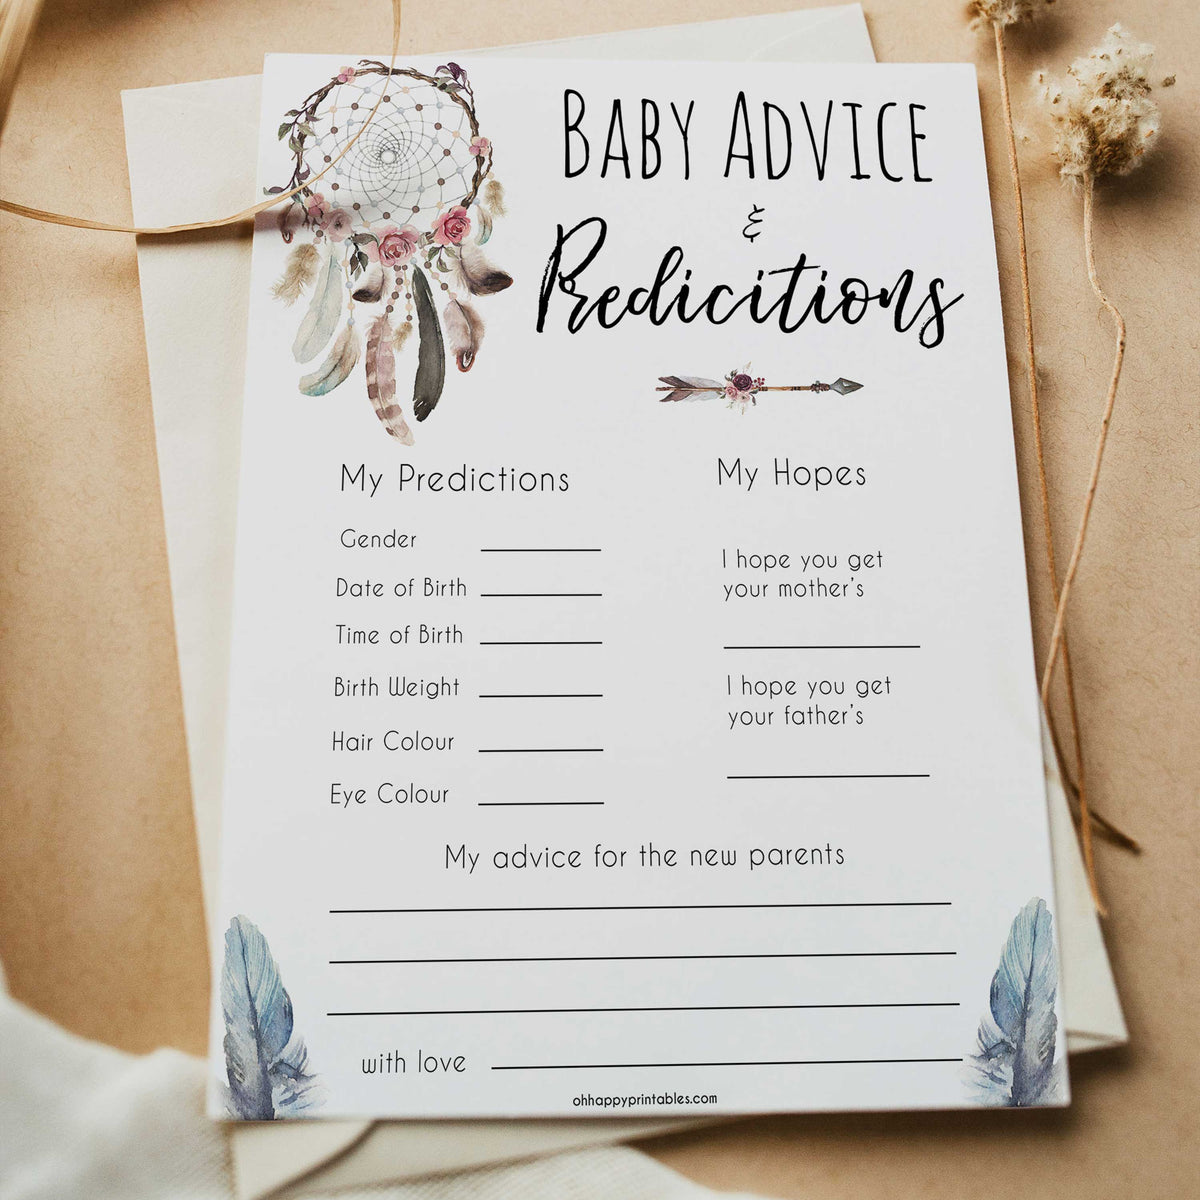 Boho baby games, baby advice and predictions baby game, fun baby games, printable baby games, top 10 baby games, boho baby shower, baby games, hilarious baby games